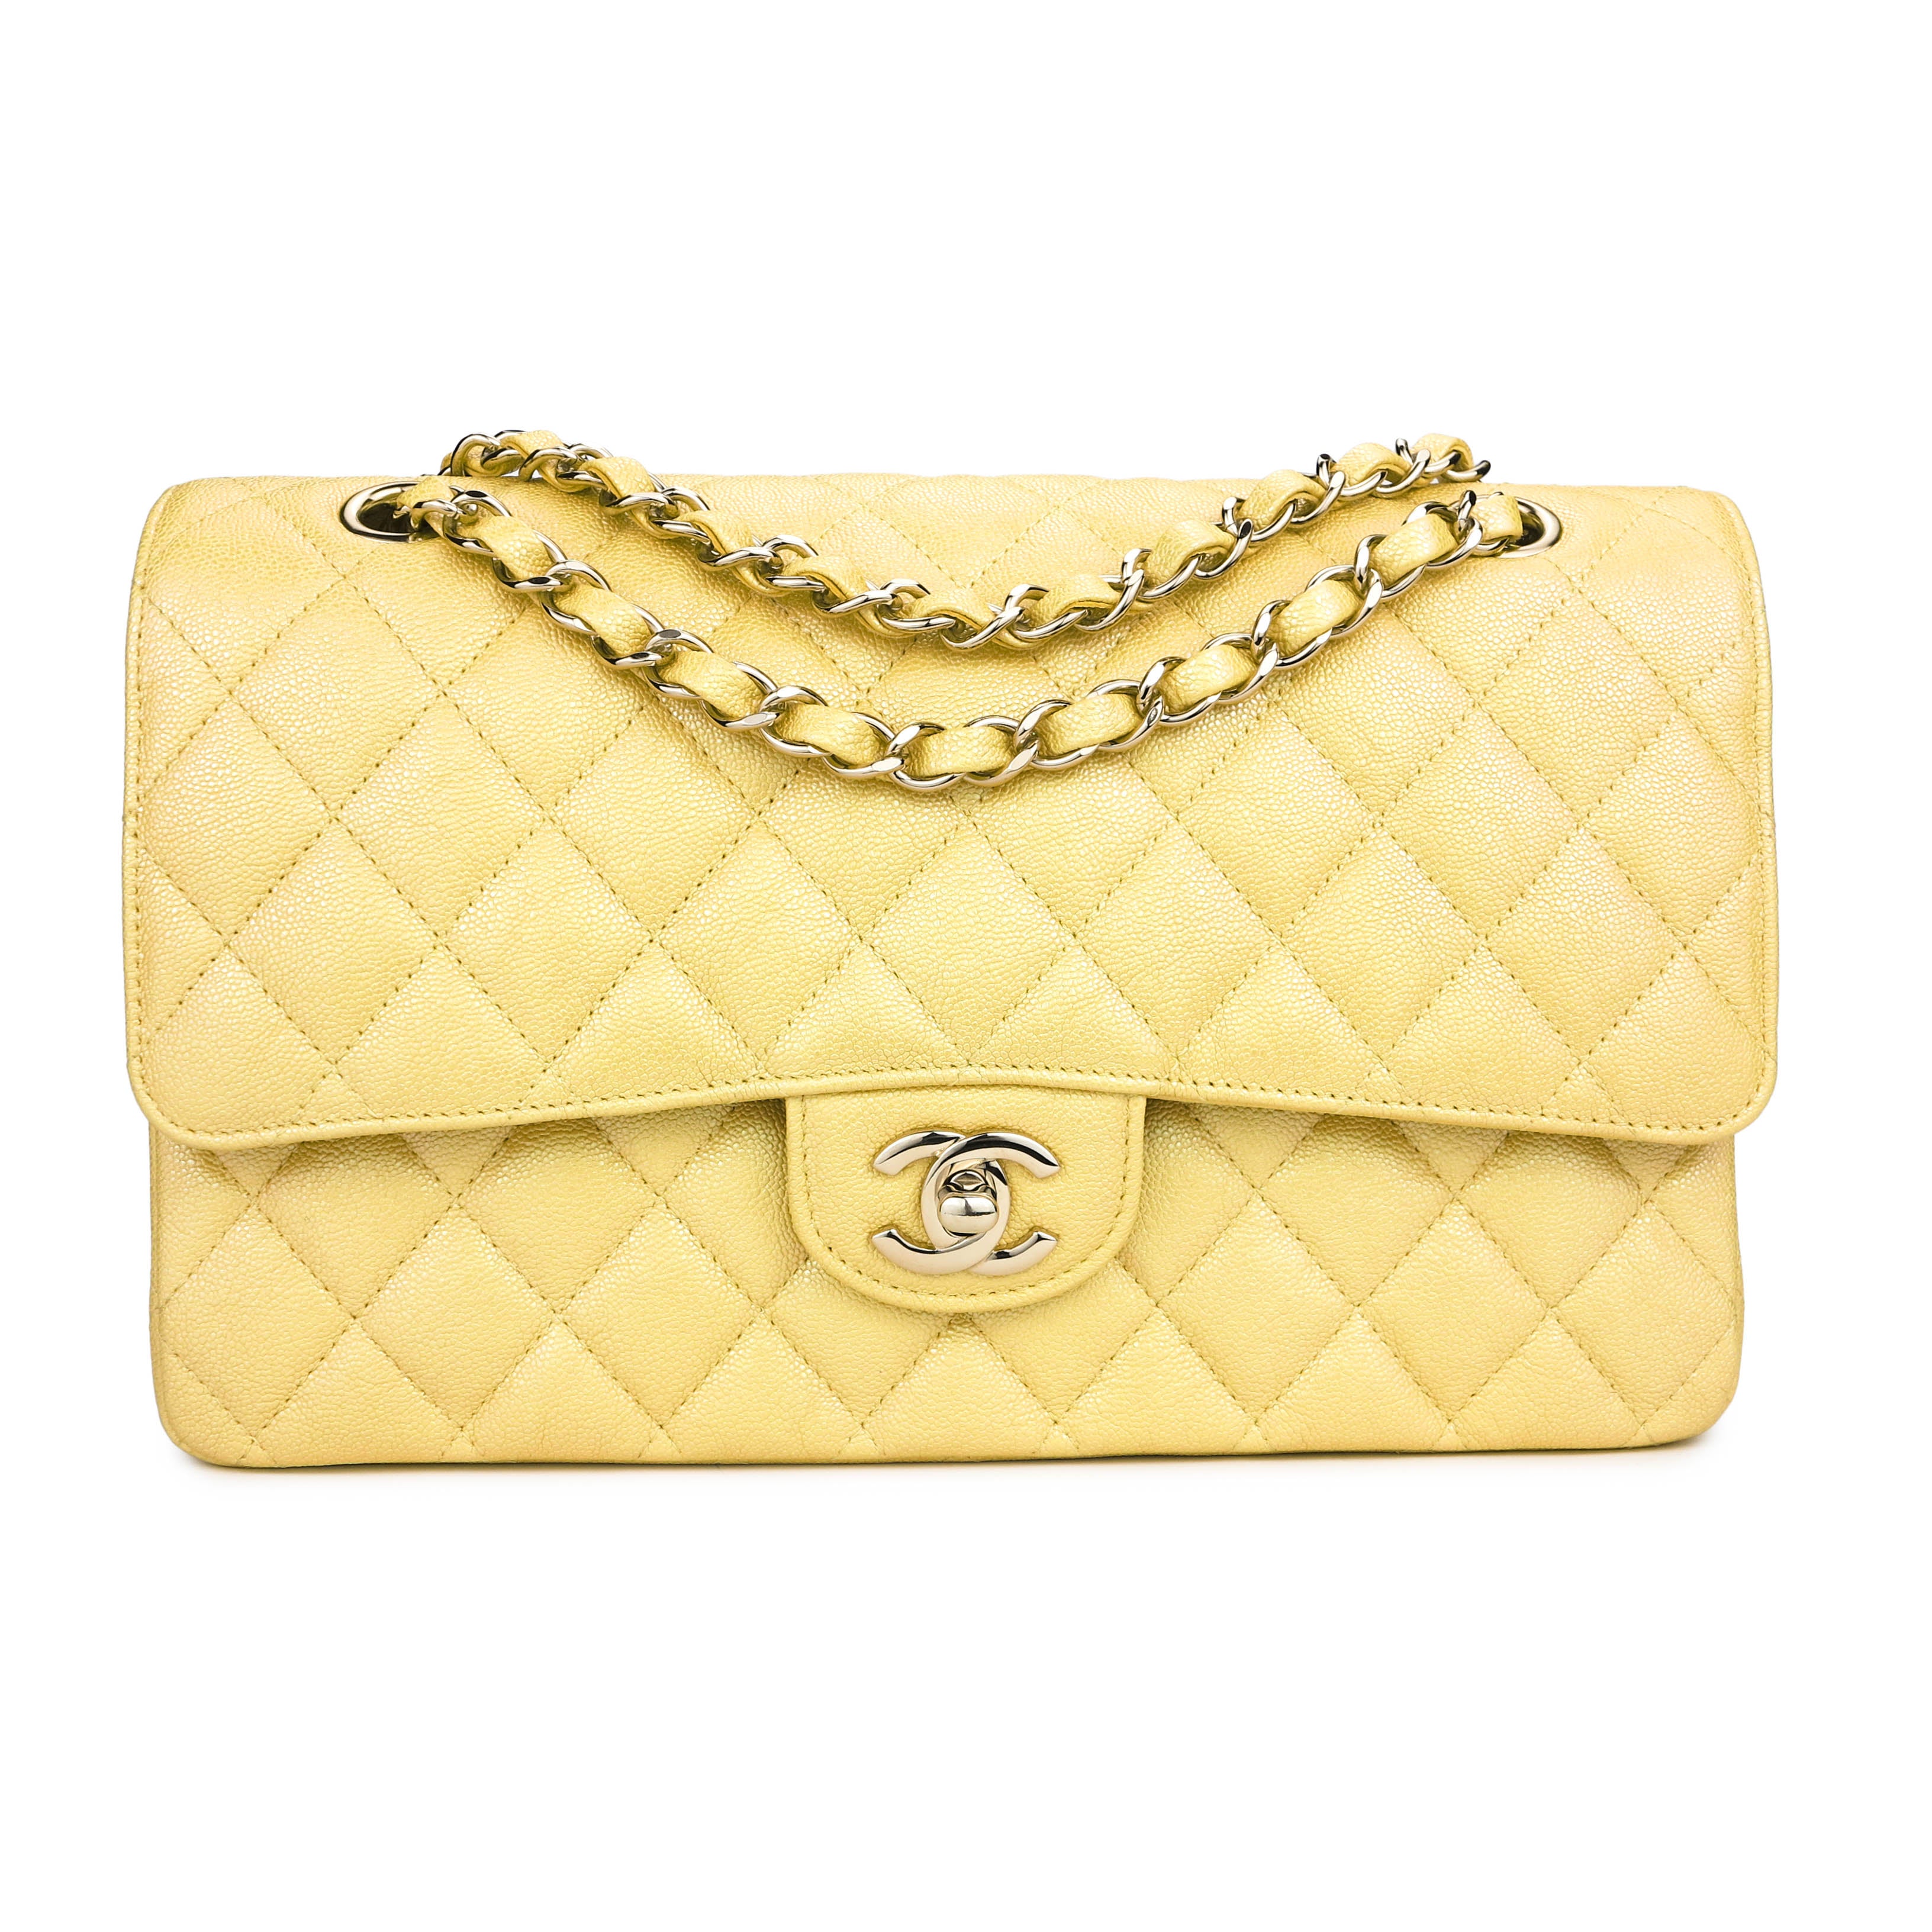 CHANEL Medium Classic Double Flap Bag in 19S Iridescent Yellow